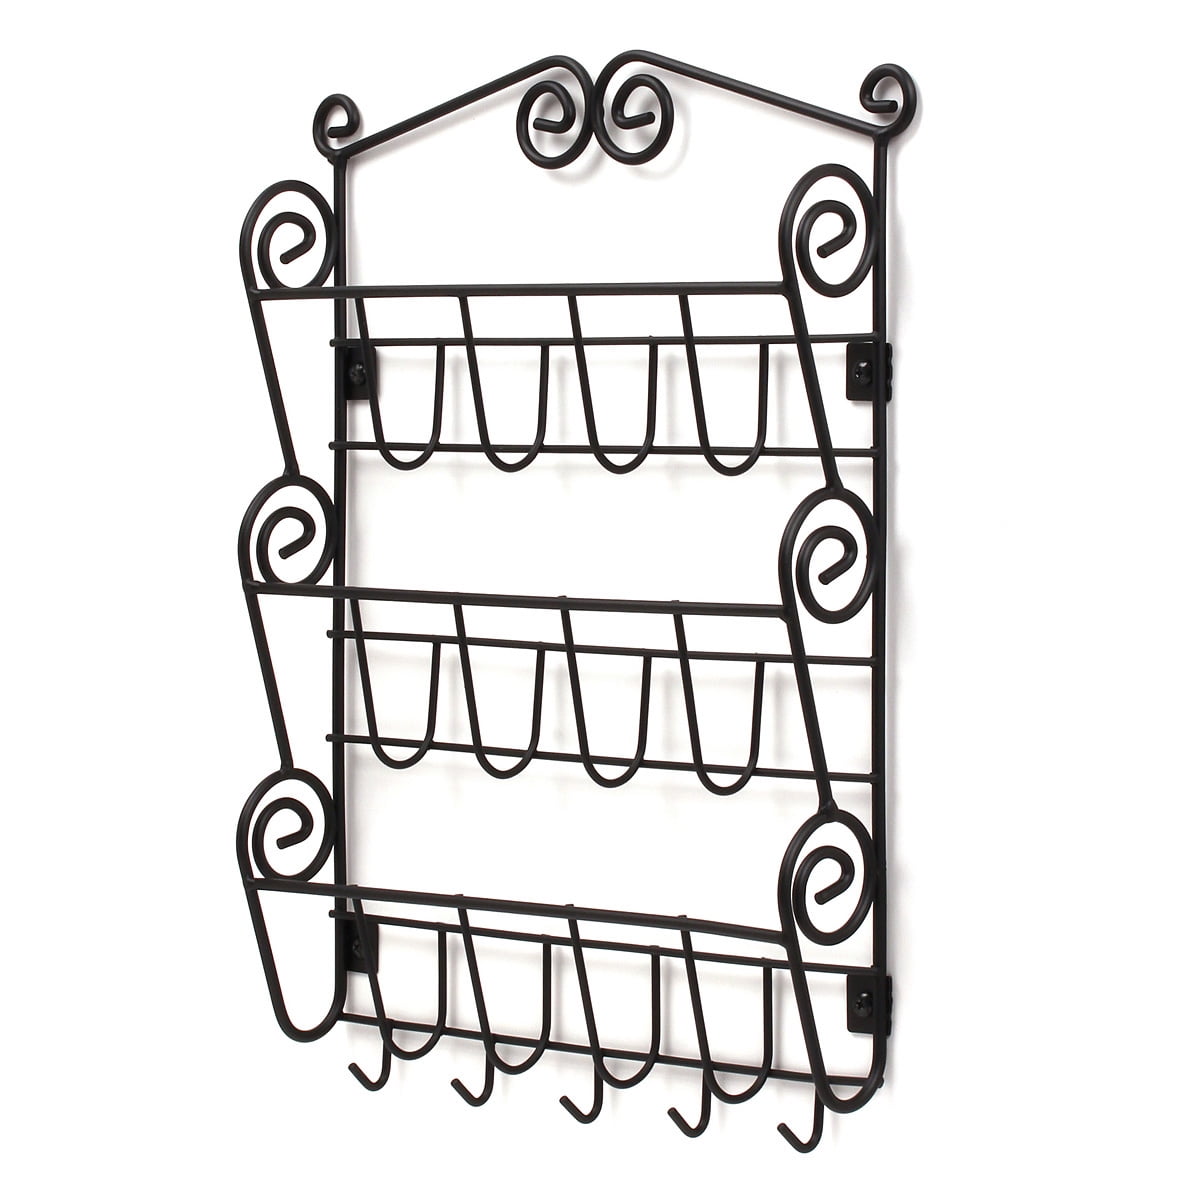 Details about   3 Tier Mail Key Letter Rack Holder Hook Wall Mount Storage Organizer Office Home 